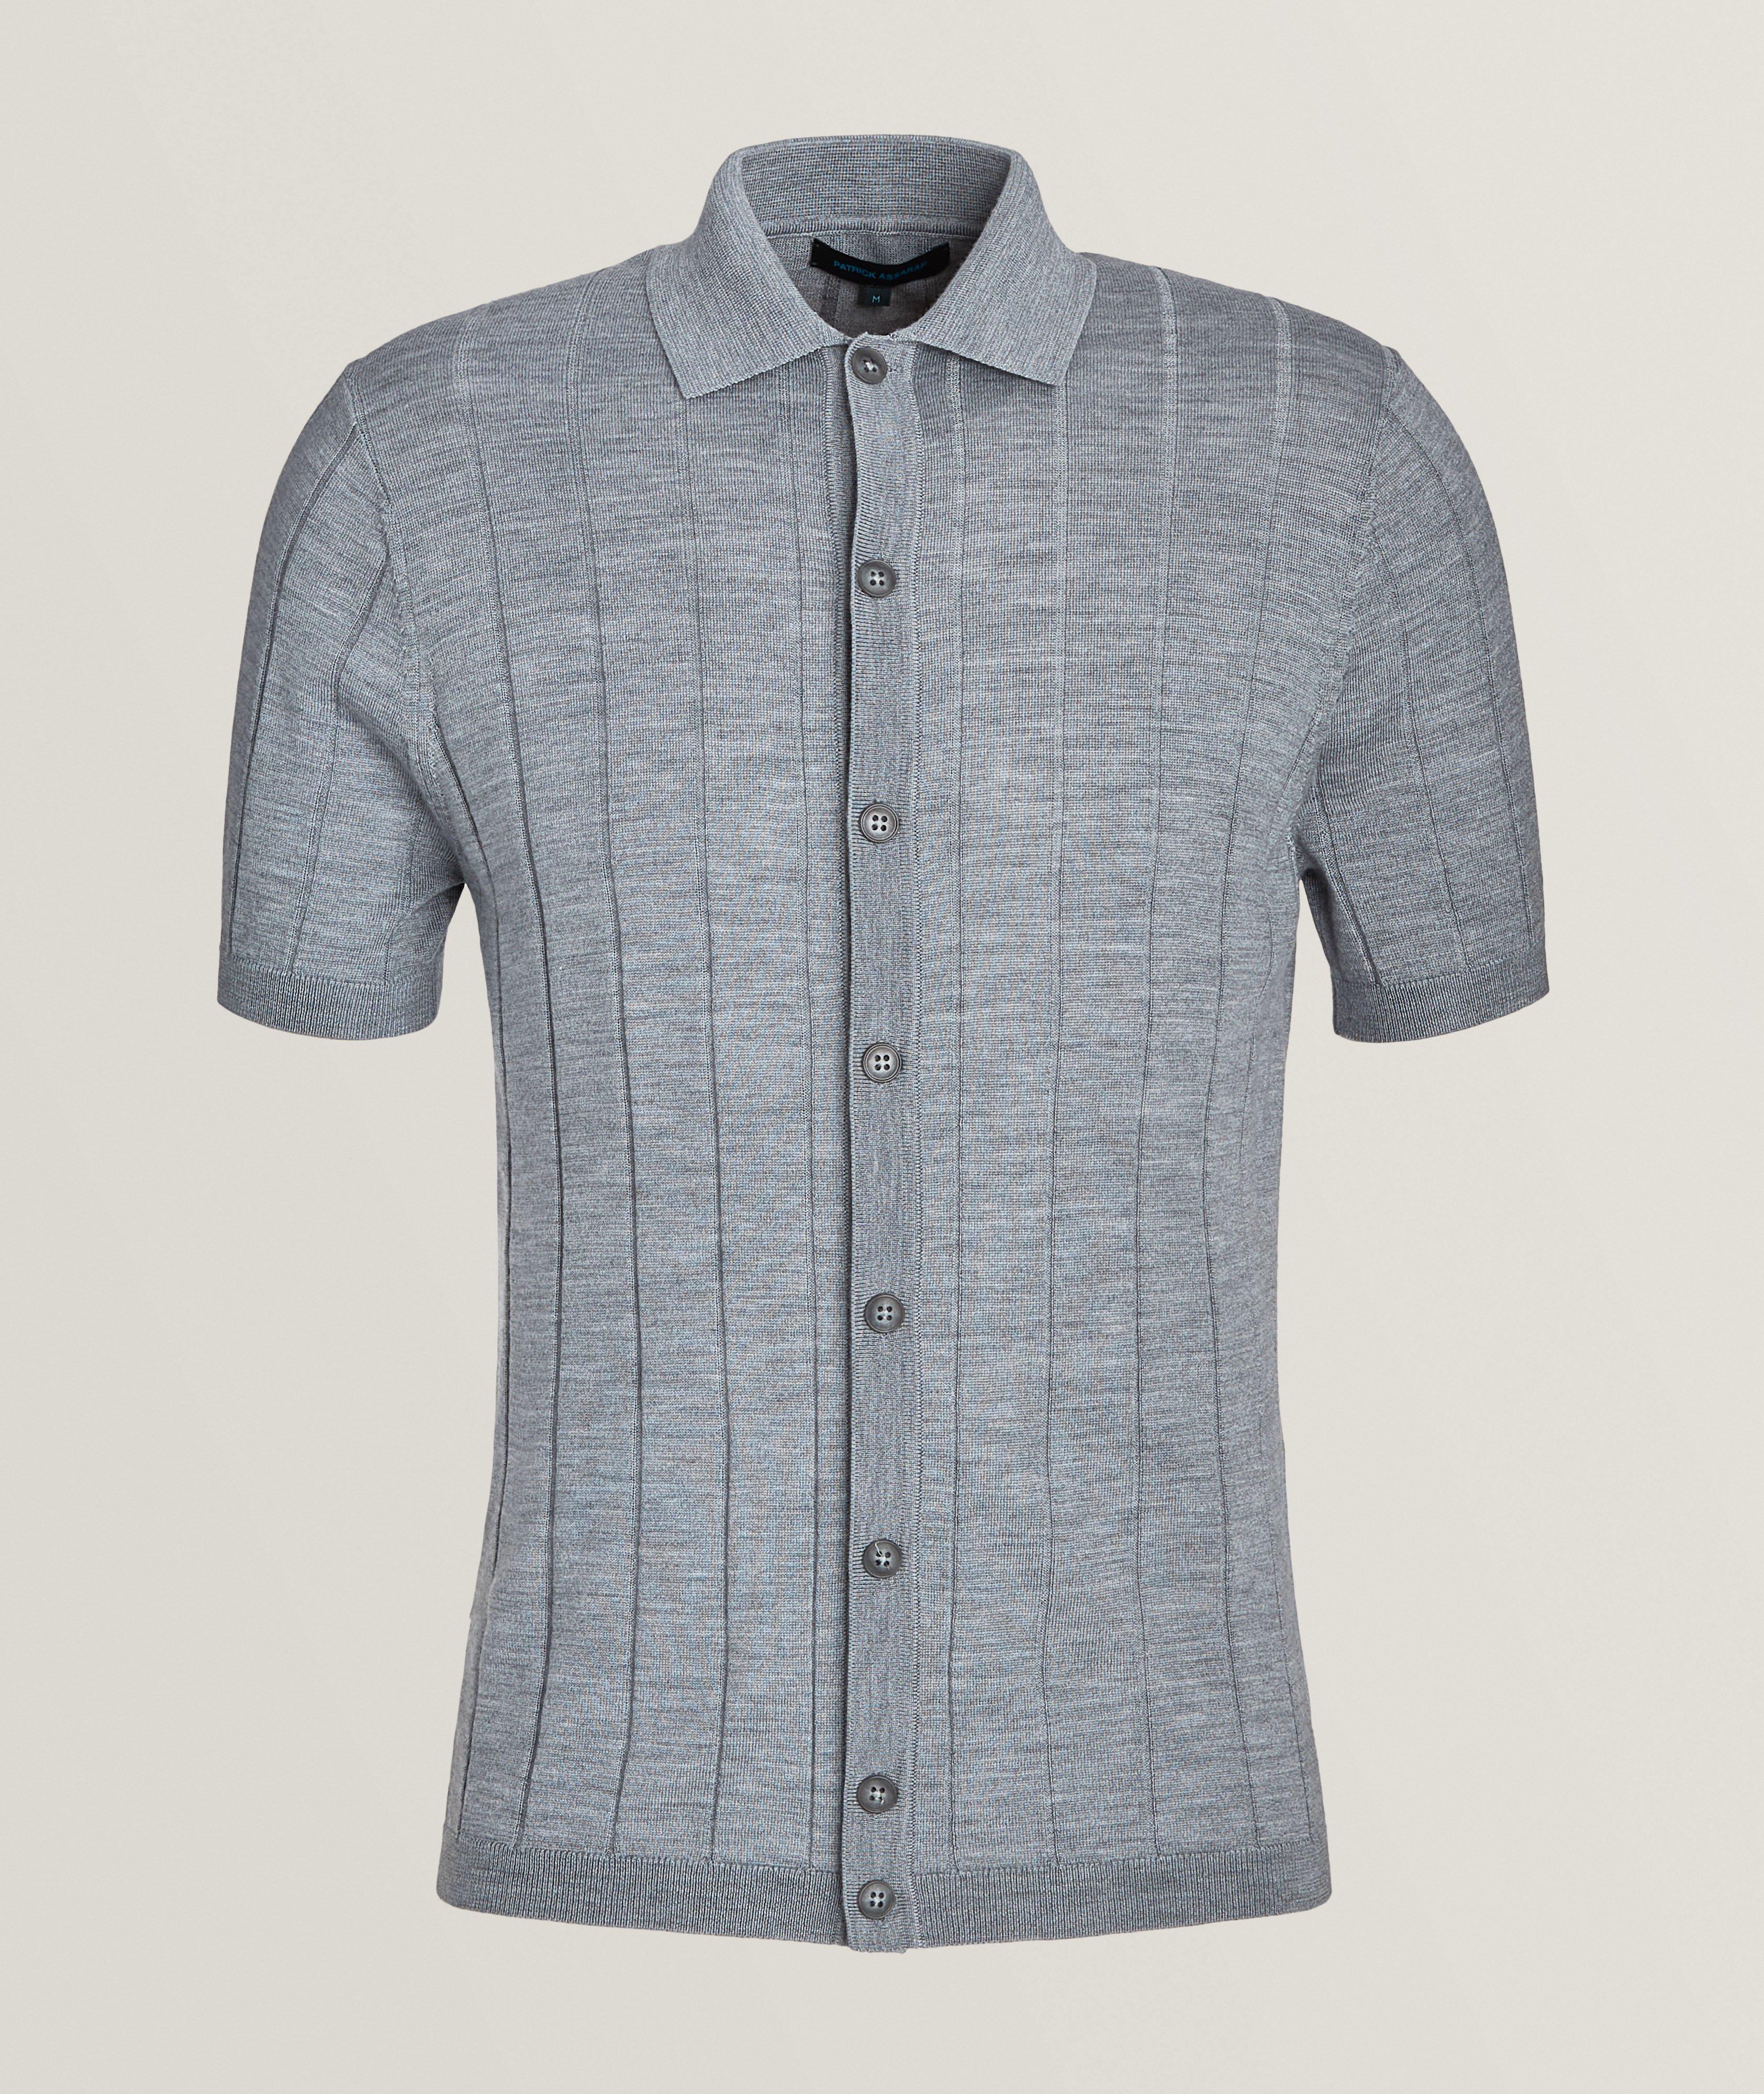 Wide Ribbed Wool-Blend Sport Shirt  image 0